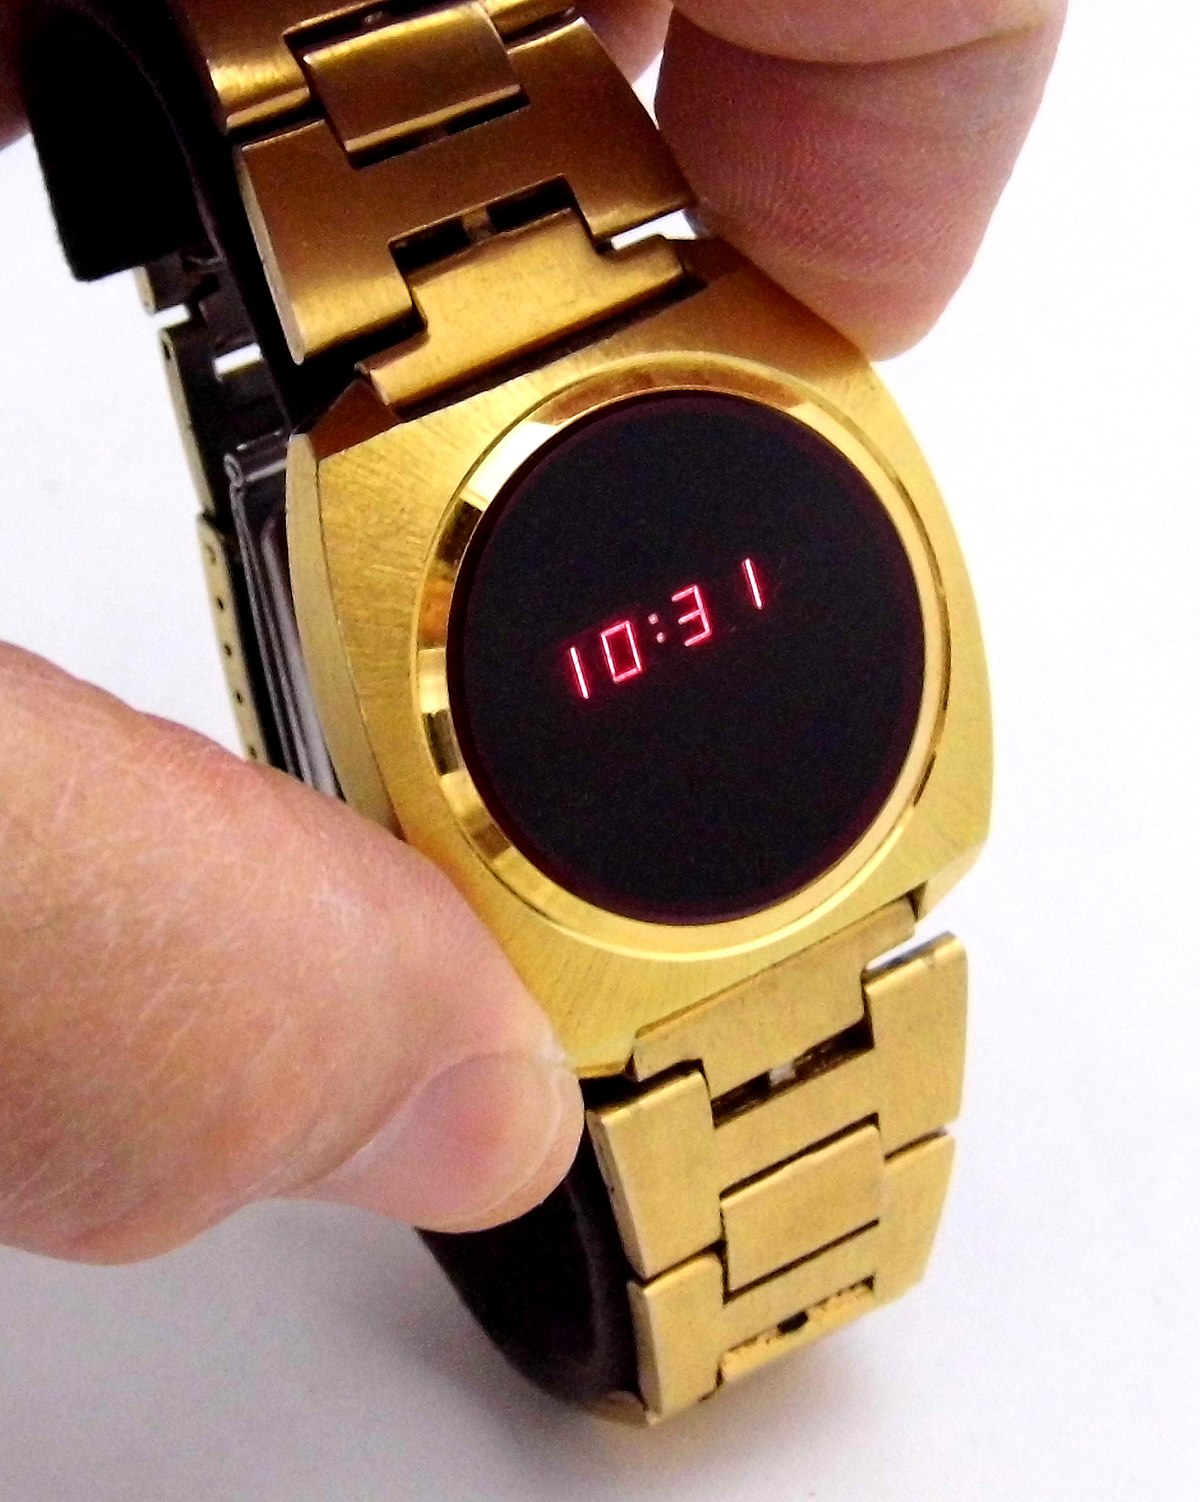 Mercury analogue watch with liquid metal time telling | Tokyoflash Japan